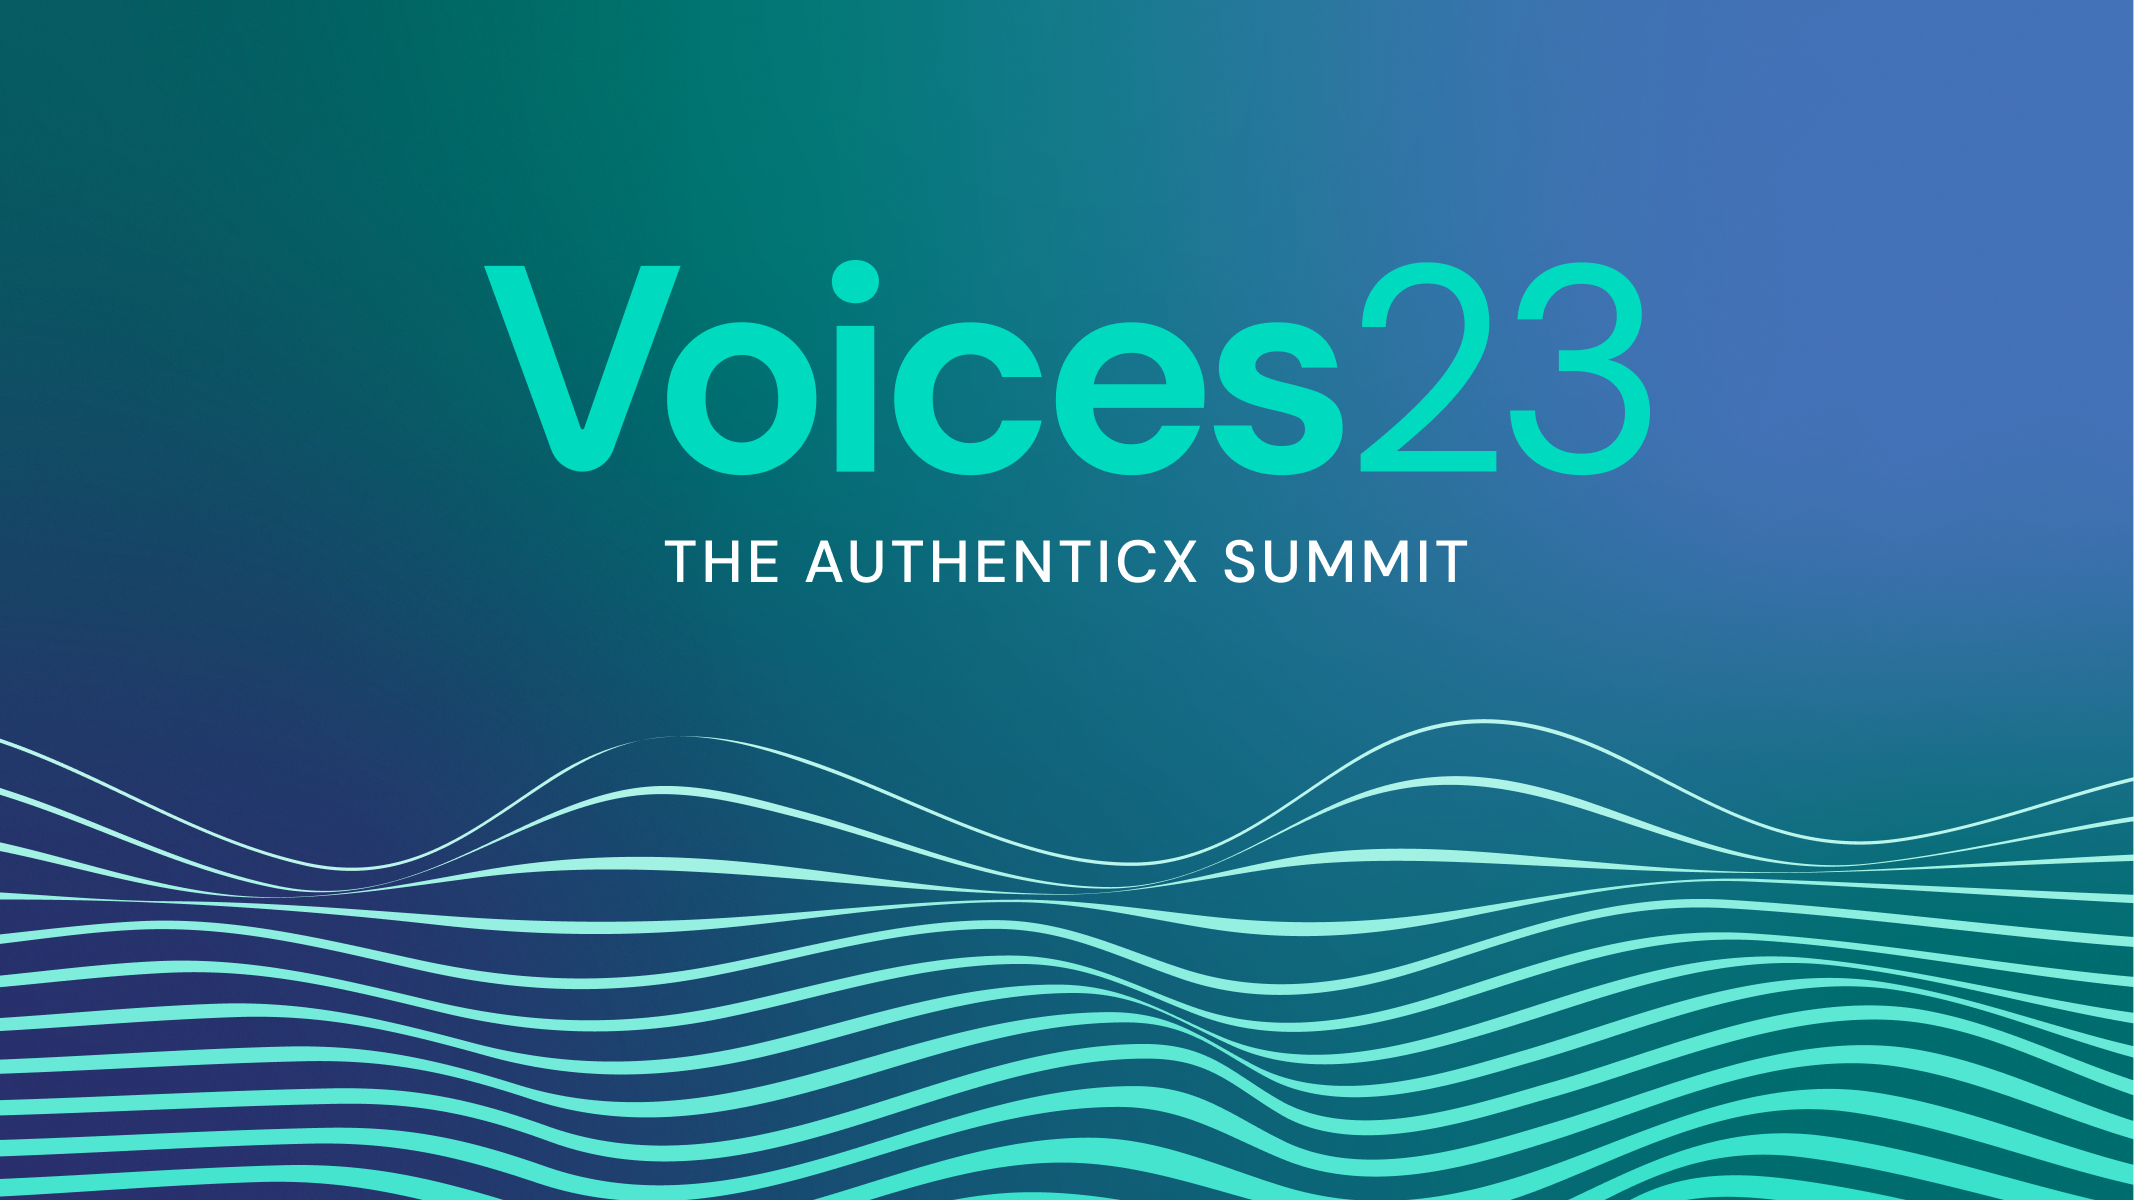 Voices23: The Inaugural Authenticx Summit